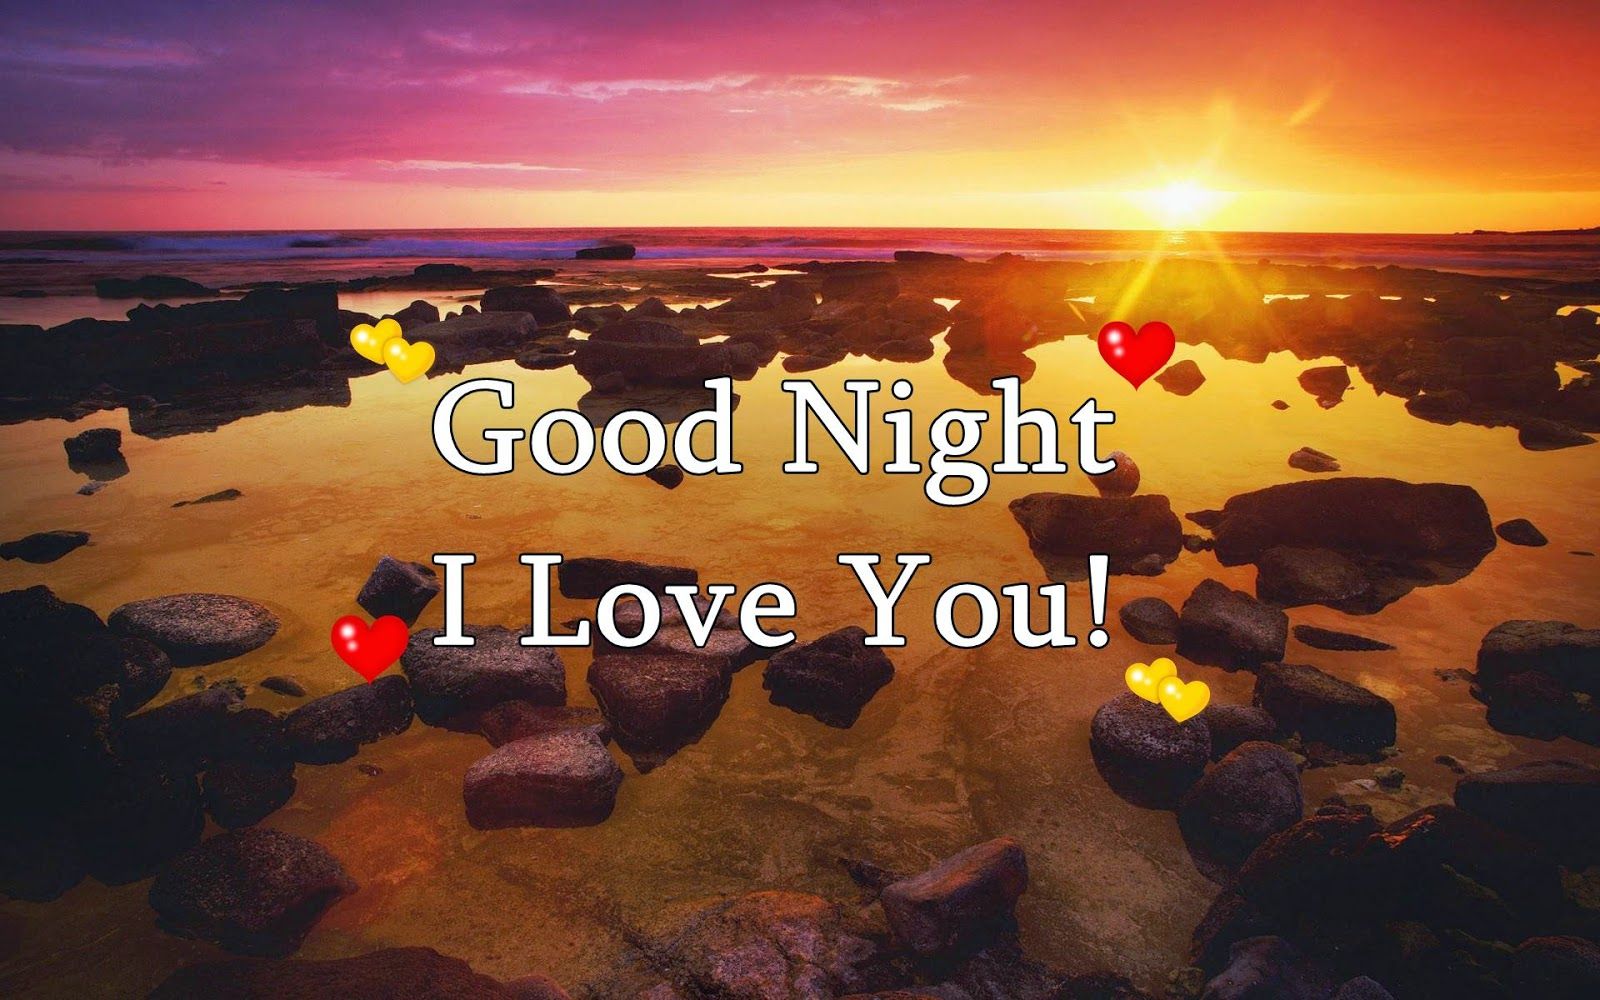 Free Download Romantic Good Night Sweet Dreams For Lovers Hd Images Download 1600x1000 For Your Desktop Mobile Tablet Explore 11 Good Night I Love You Wallpapers Good Night I